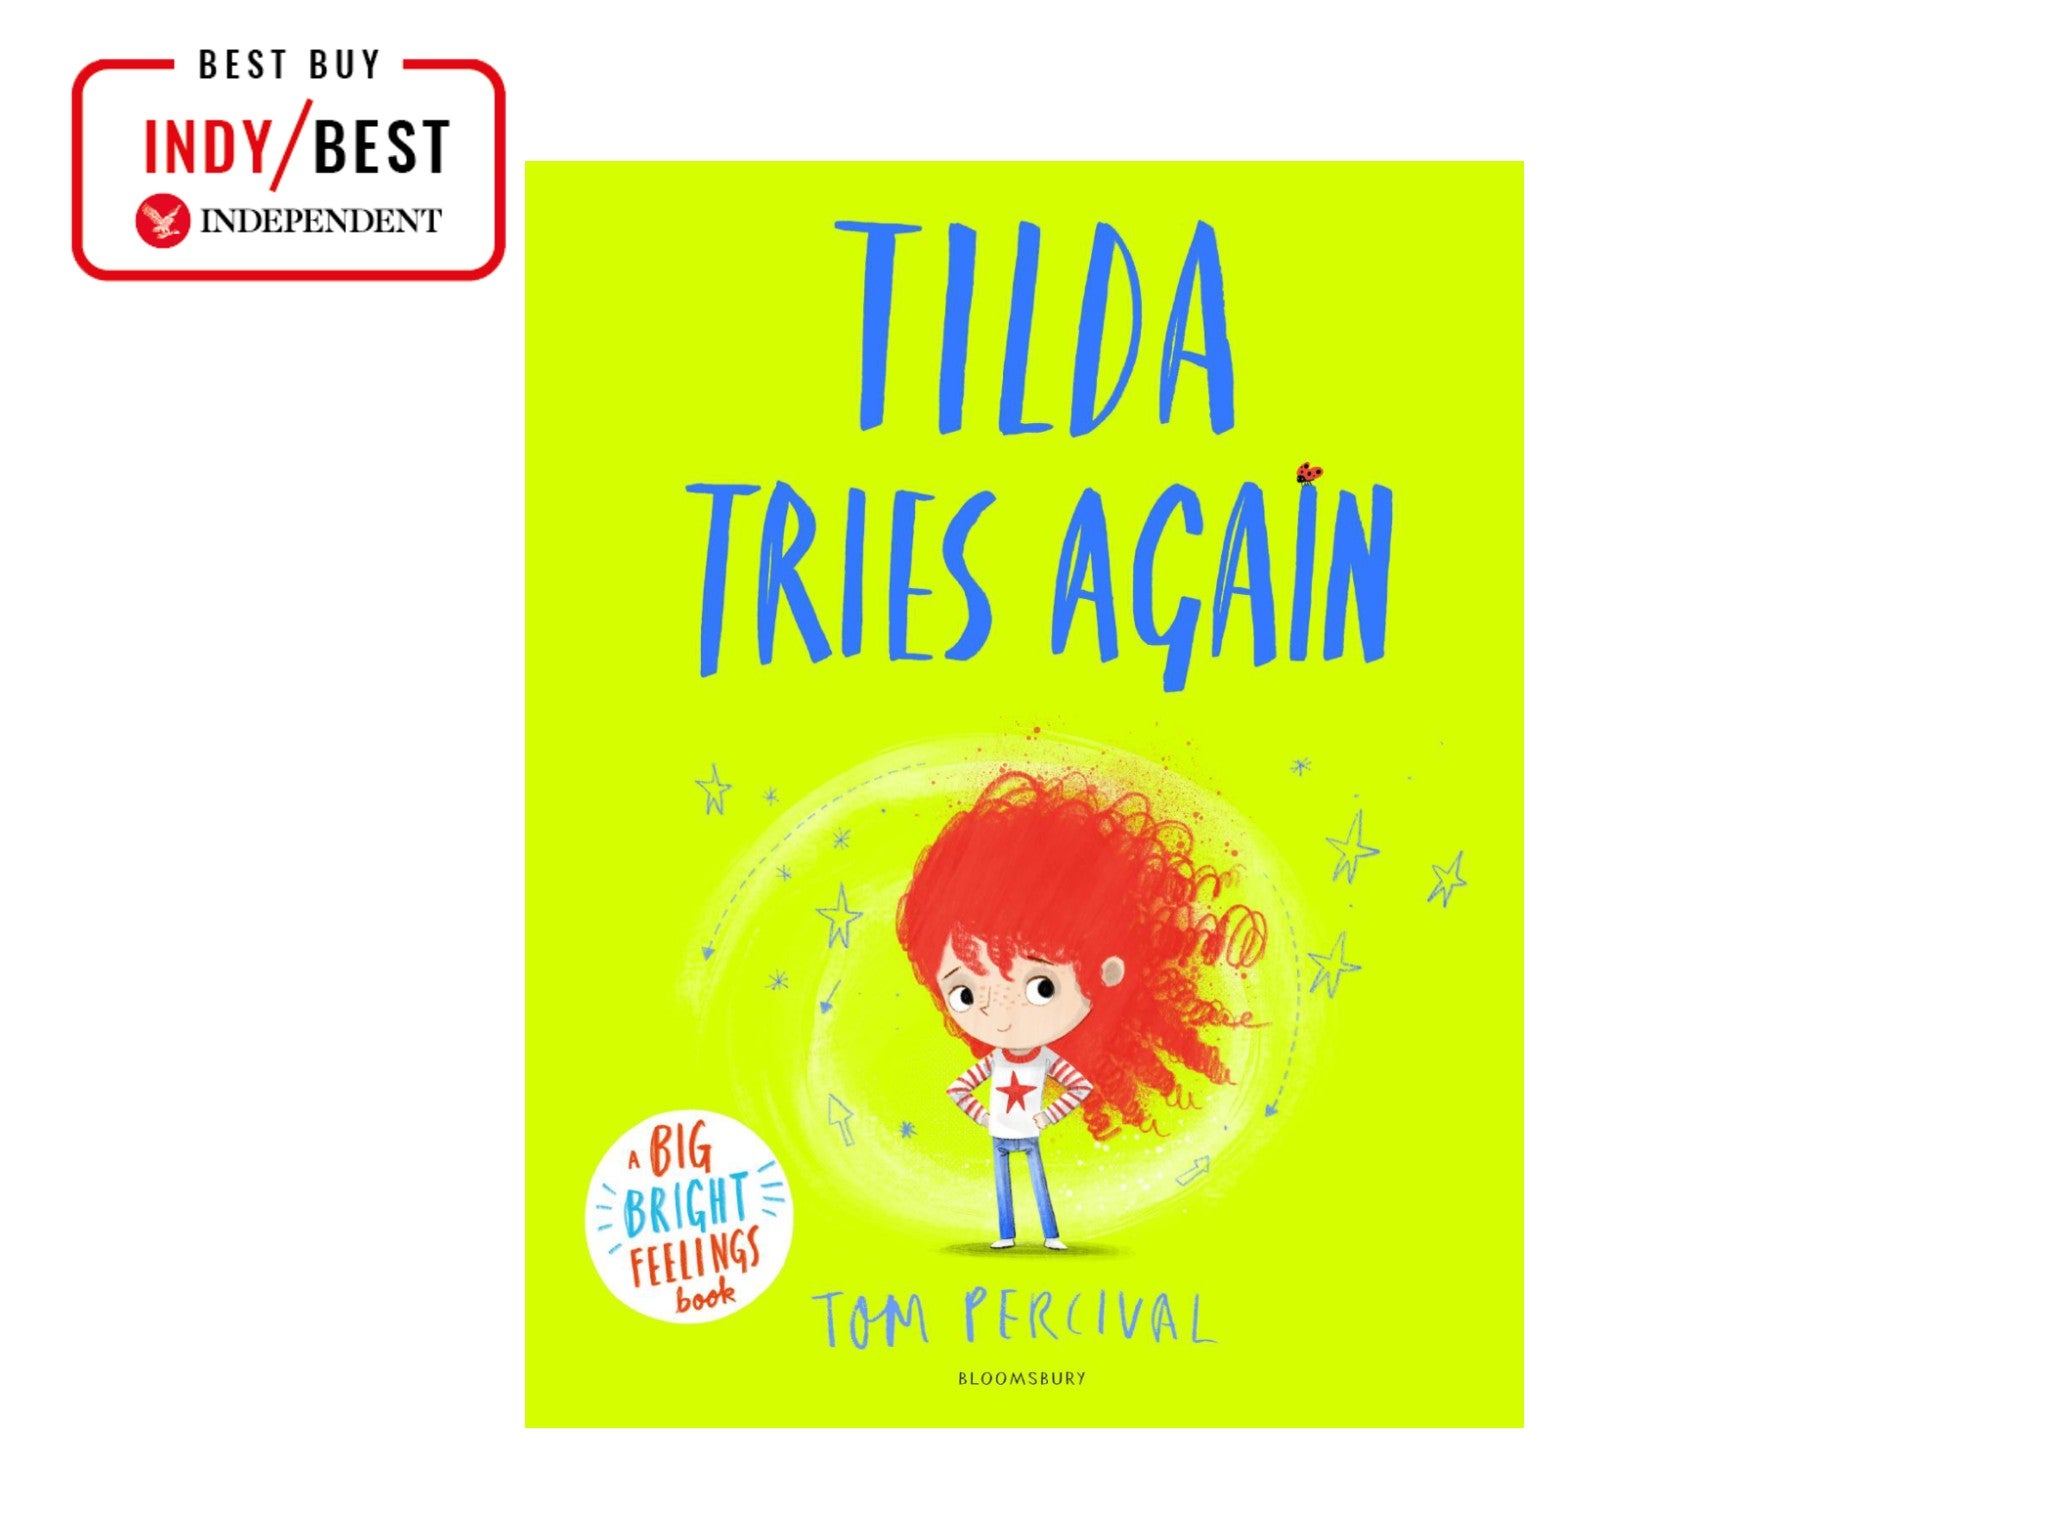 Tilda Tries Again, by Tom Percival, published by Bloomsbury indybest.jpeg